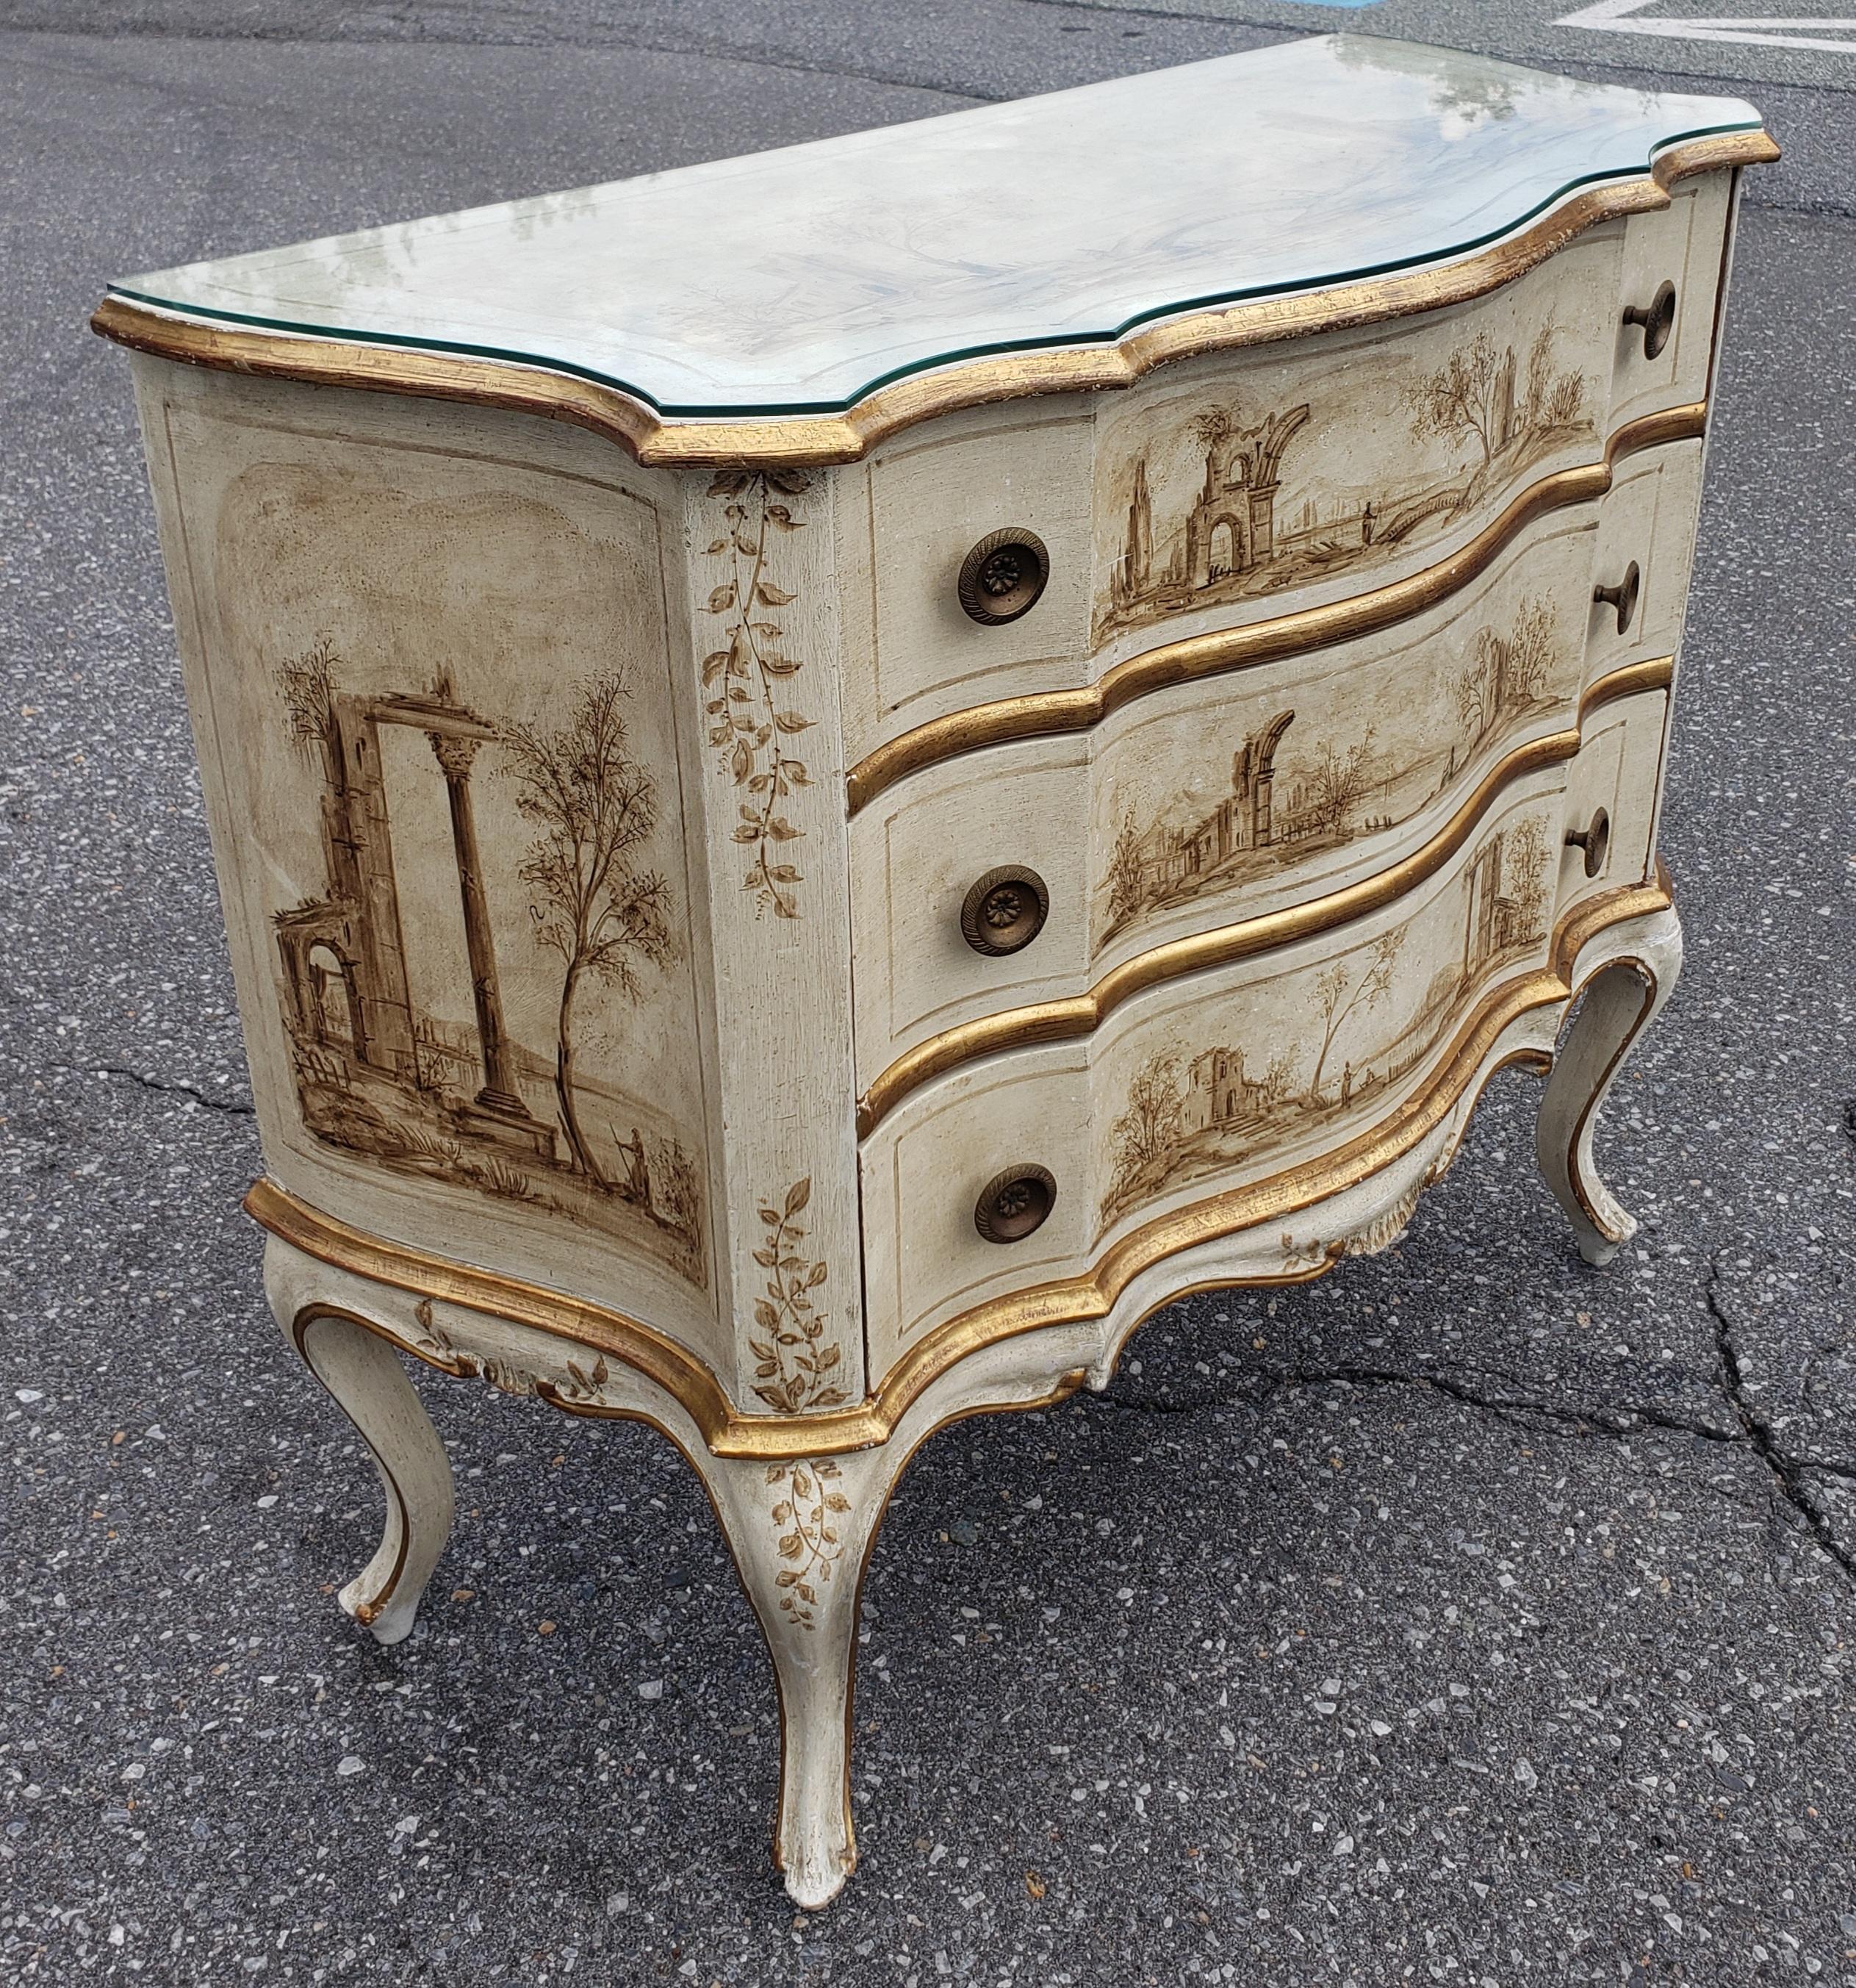 20th Century Early 20th C. Venetian Hand-Painted and Decorated Partial Gilt Commode w/ Glass For Sale